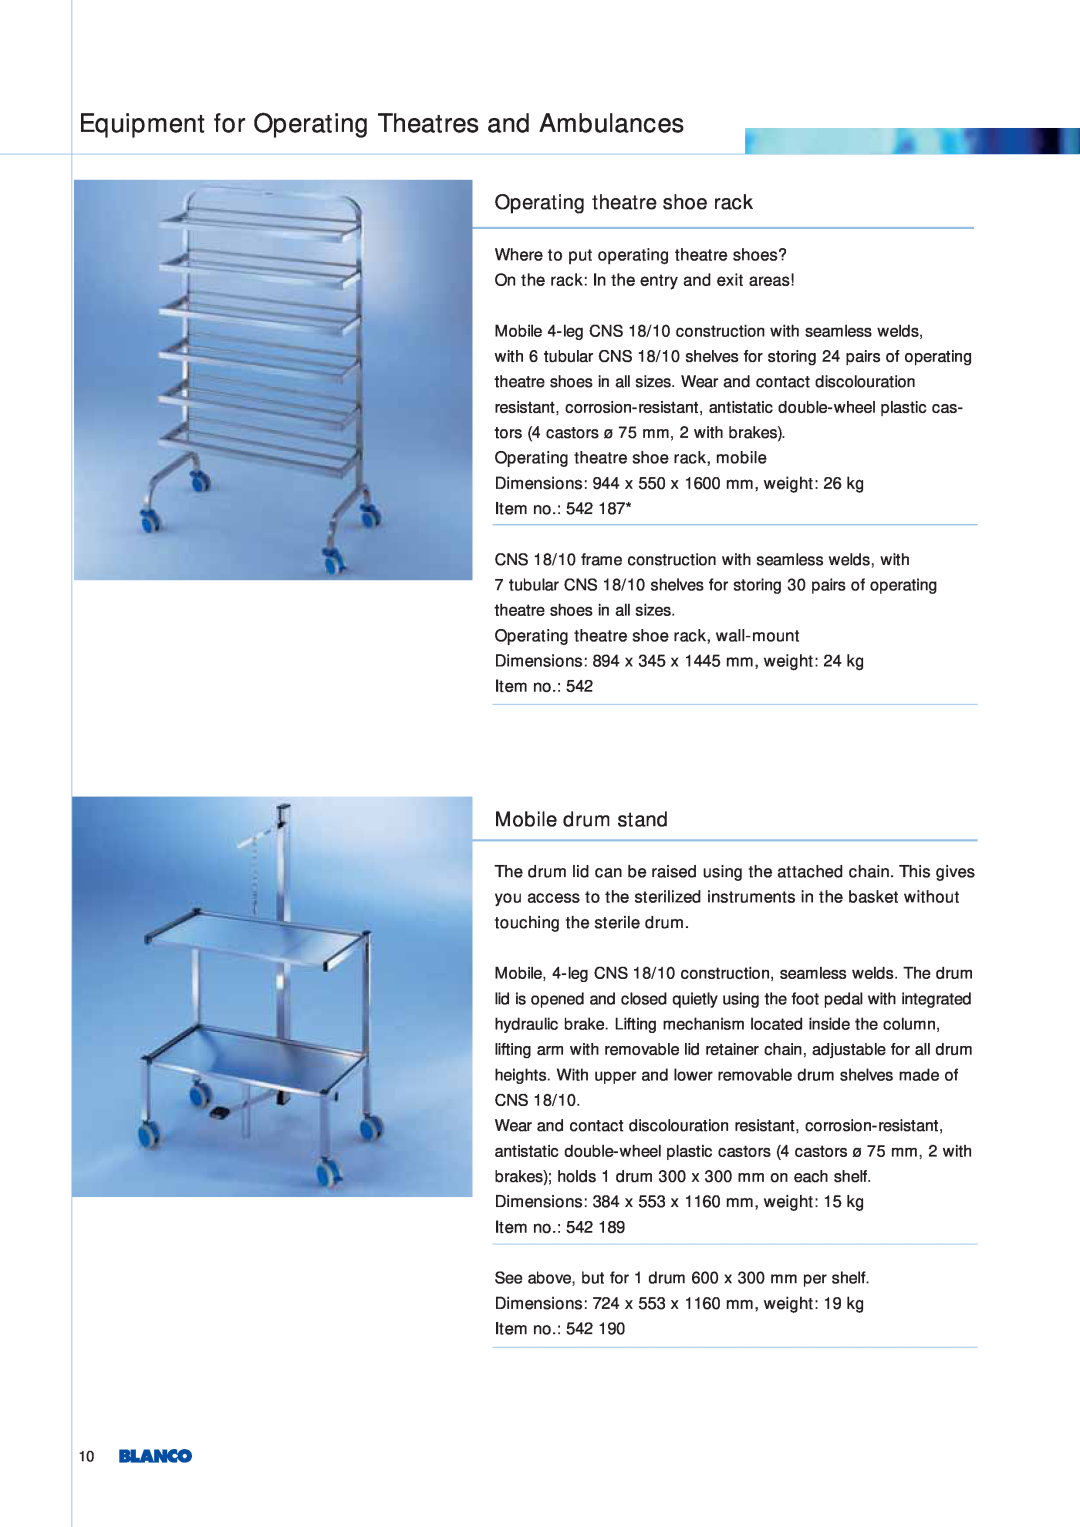 Blanco Tbingen manual Operating theatre shoe rack, Mobile drum stand, Equipment for Operating Theatres and Ambulances 